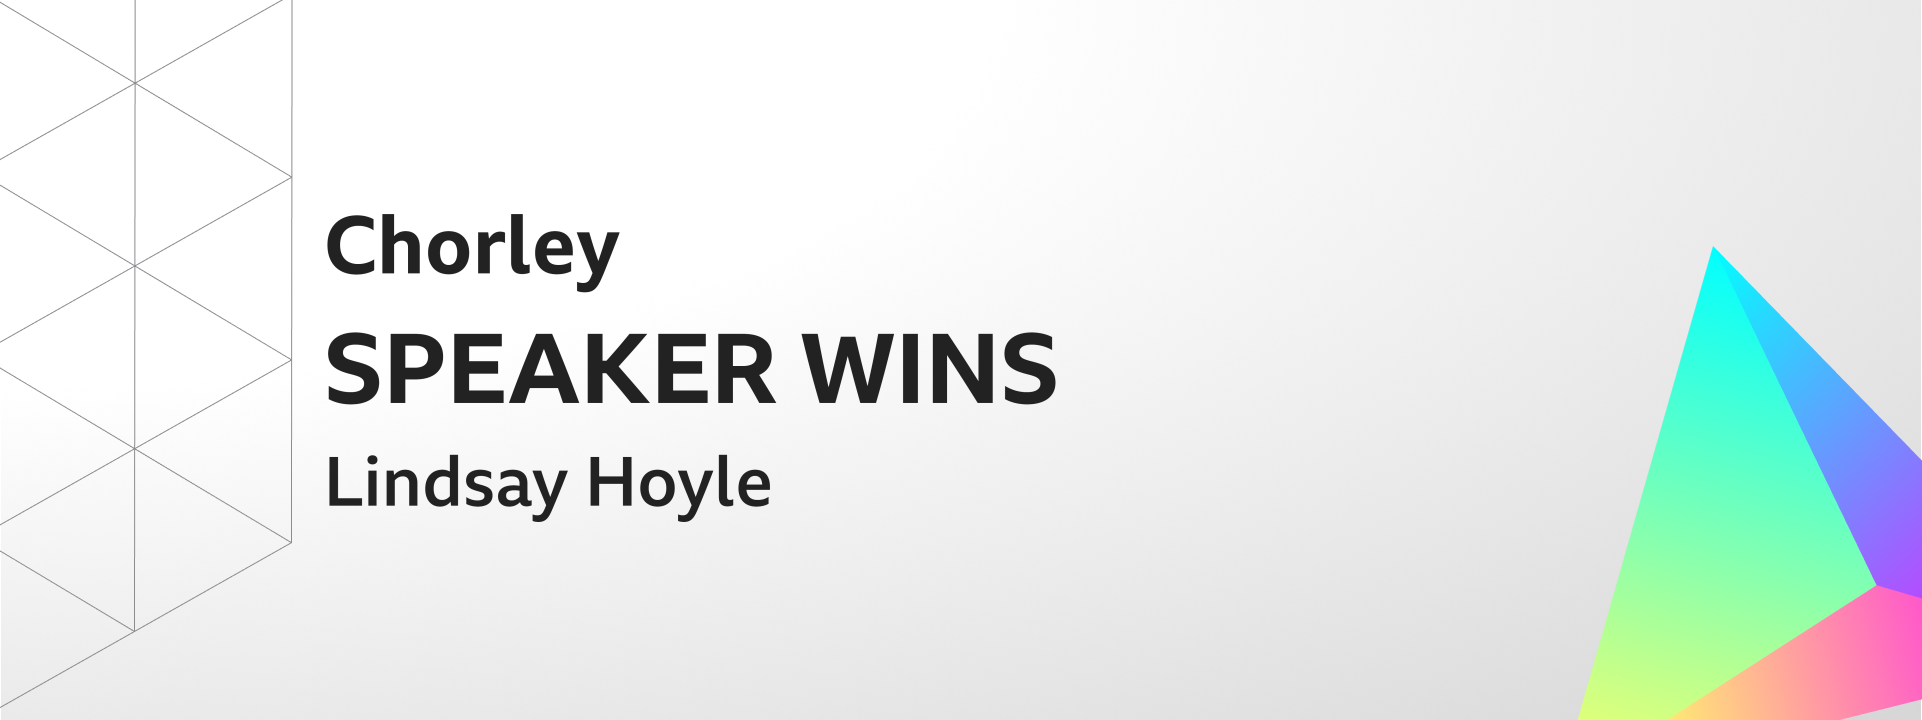 Graphic showing Speaker holds Chorley. The winning candidate was Lindsay Hoyle.